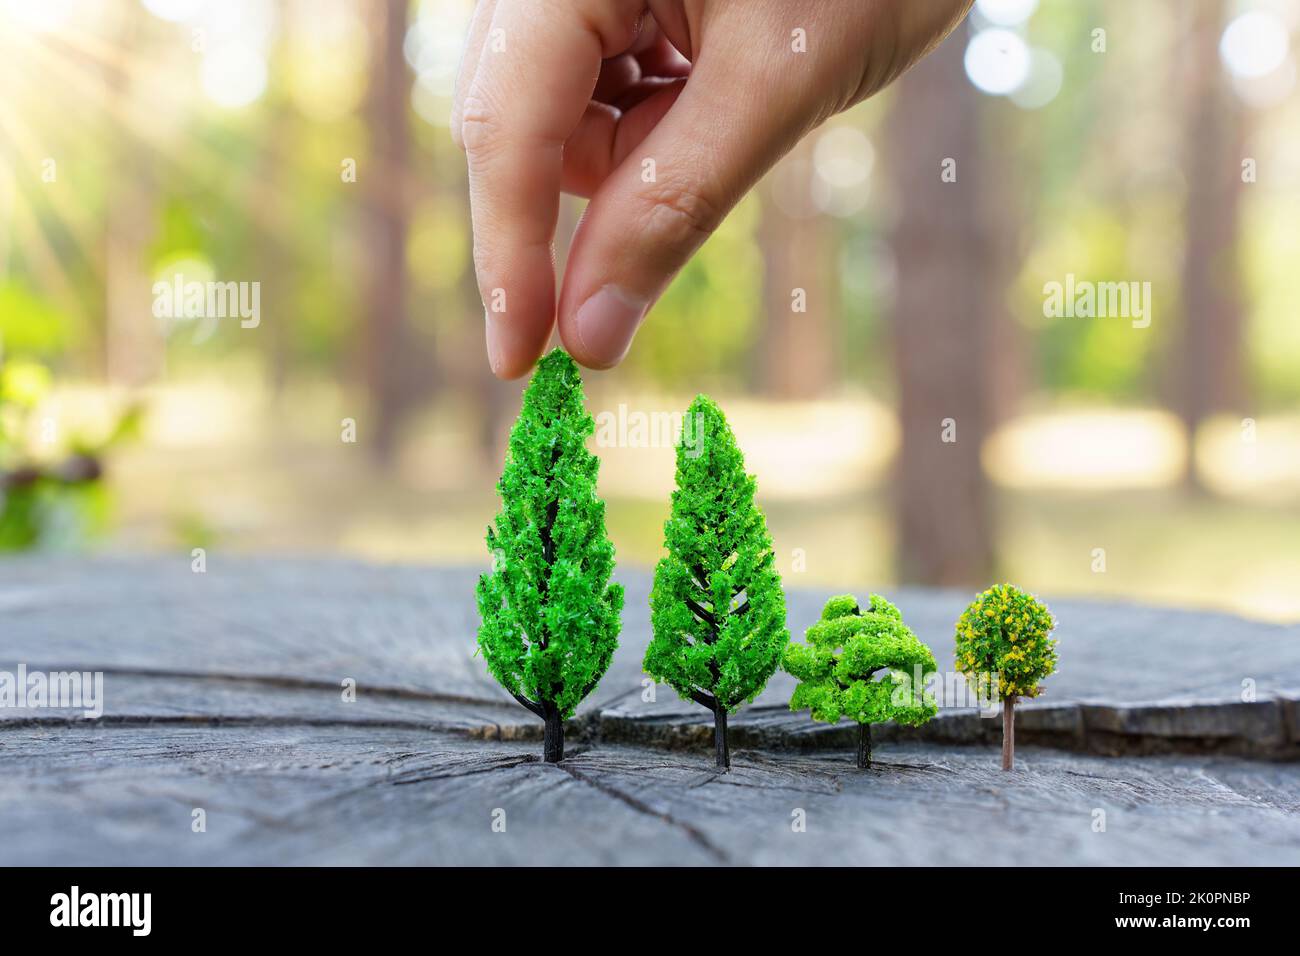 Hand planting small toy trees on a tree stump in the woods. Creative reforestation concept. Stock Photo